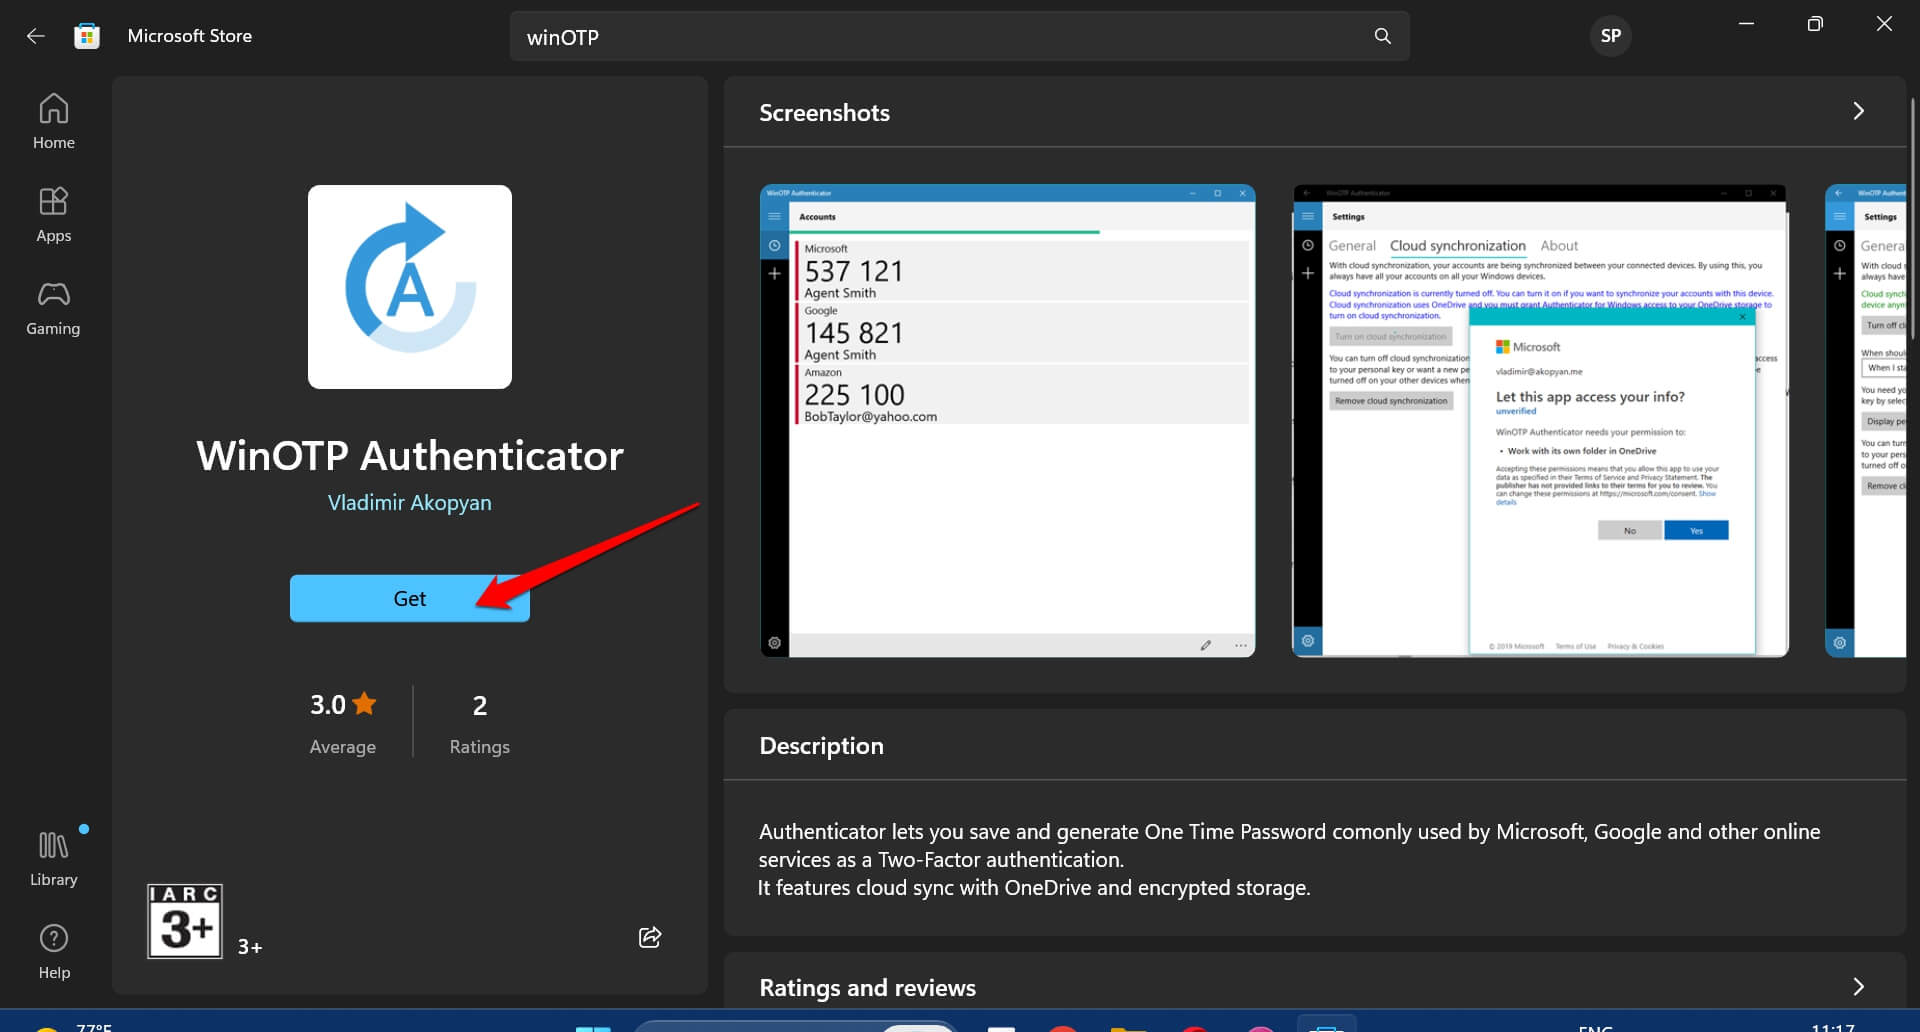 download-winOTP-authenticator-for-Windows